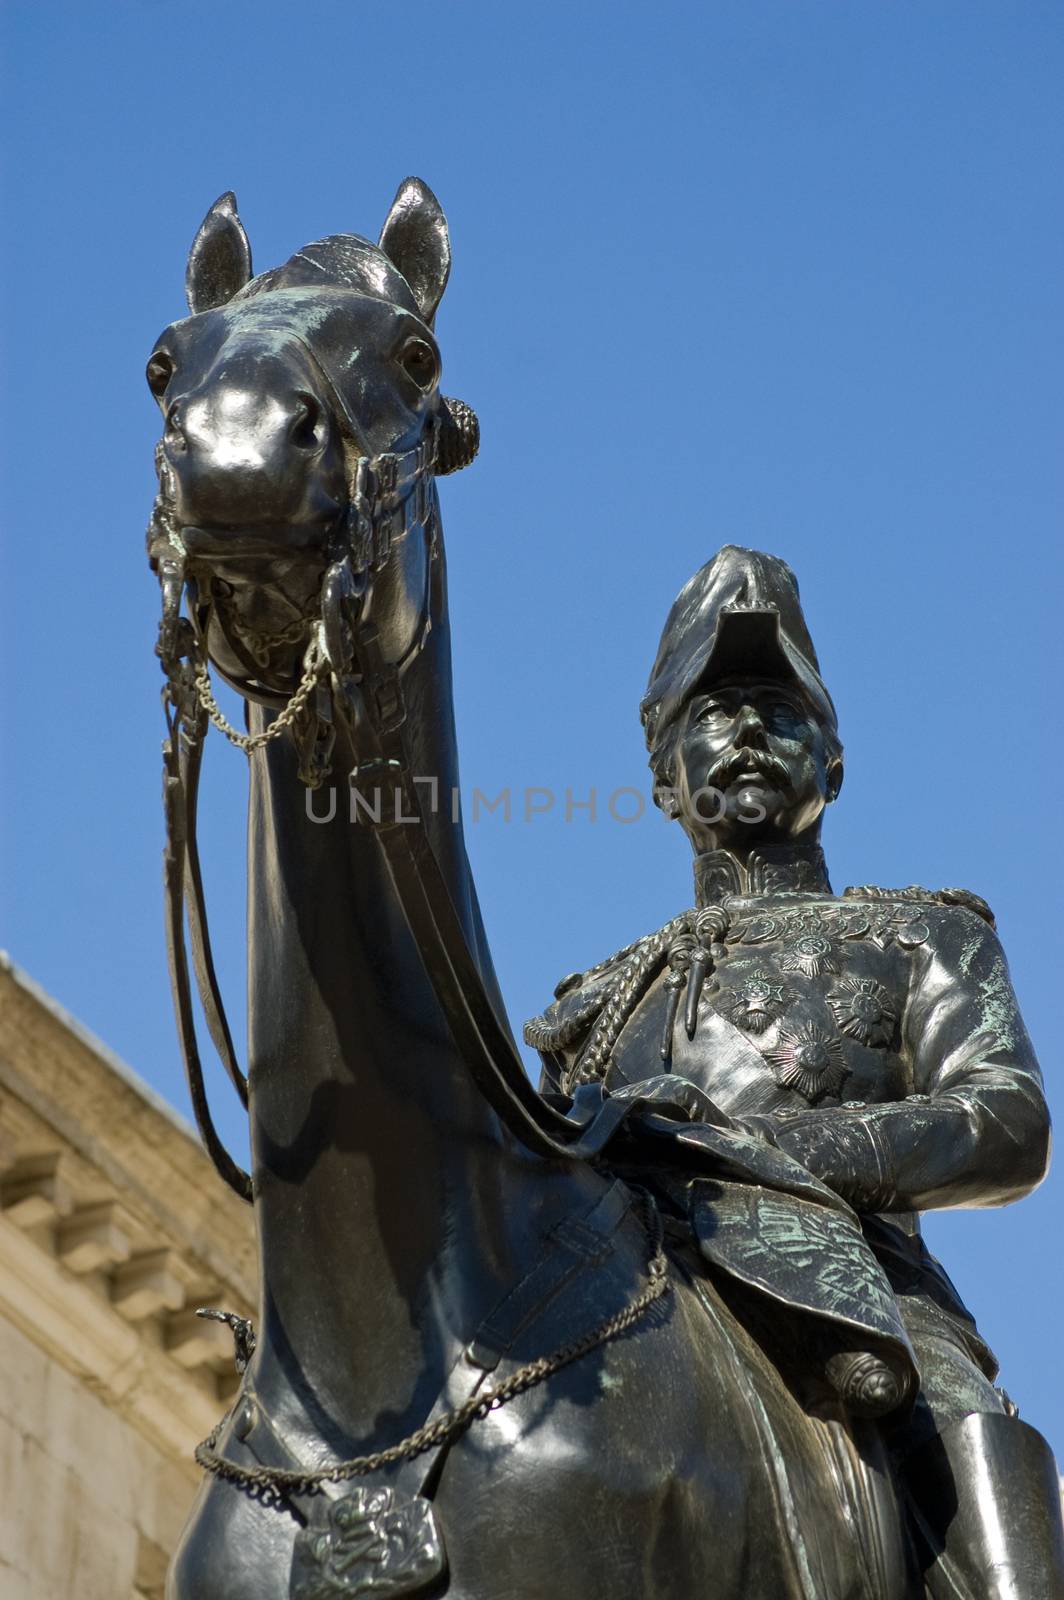 Monument statue of Viscount Garnet Wolseley (1833 - 1913). The former Field Marshall officer was a hero who served in the Crimean War; Statue in Horse Guards Parade, Westminster, London